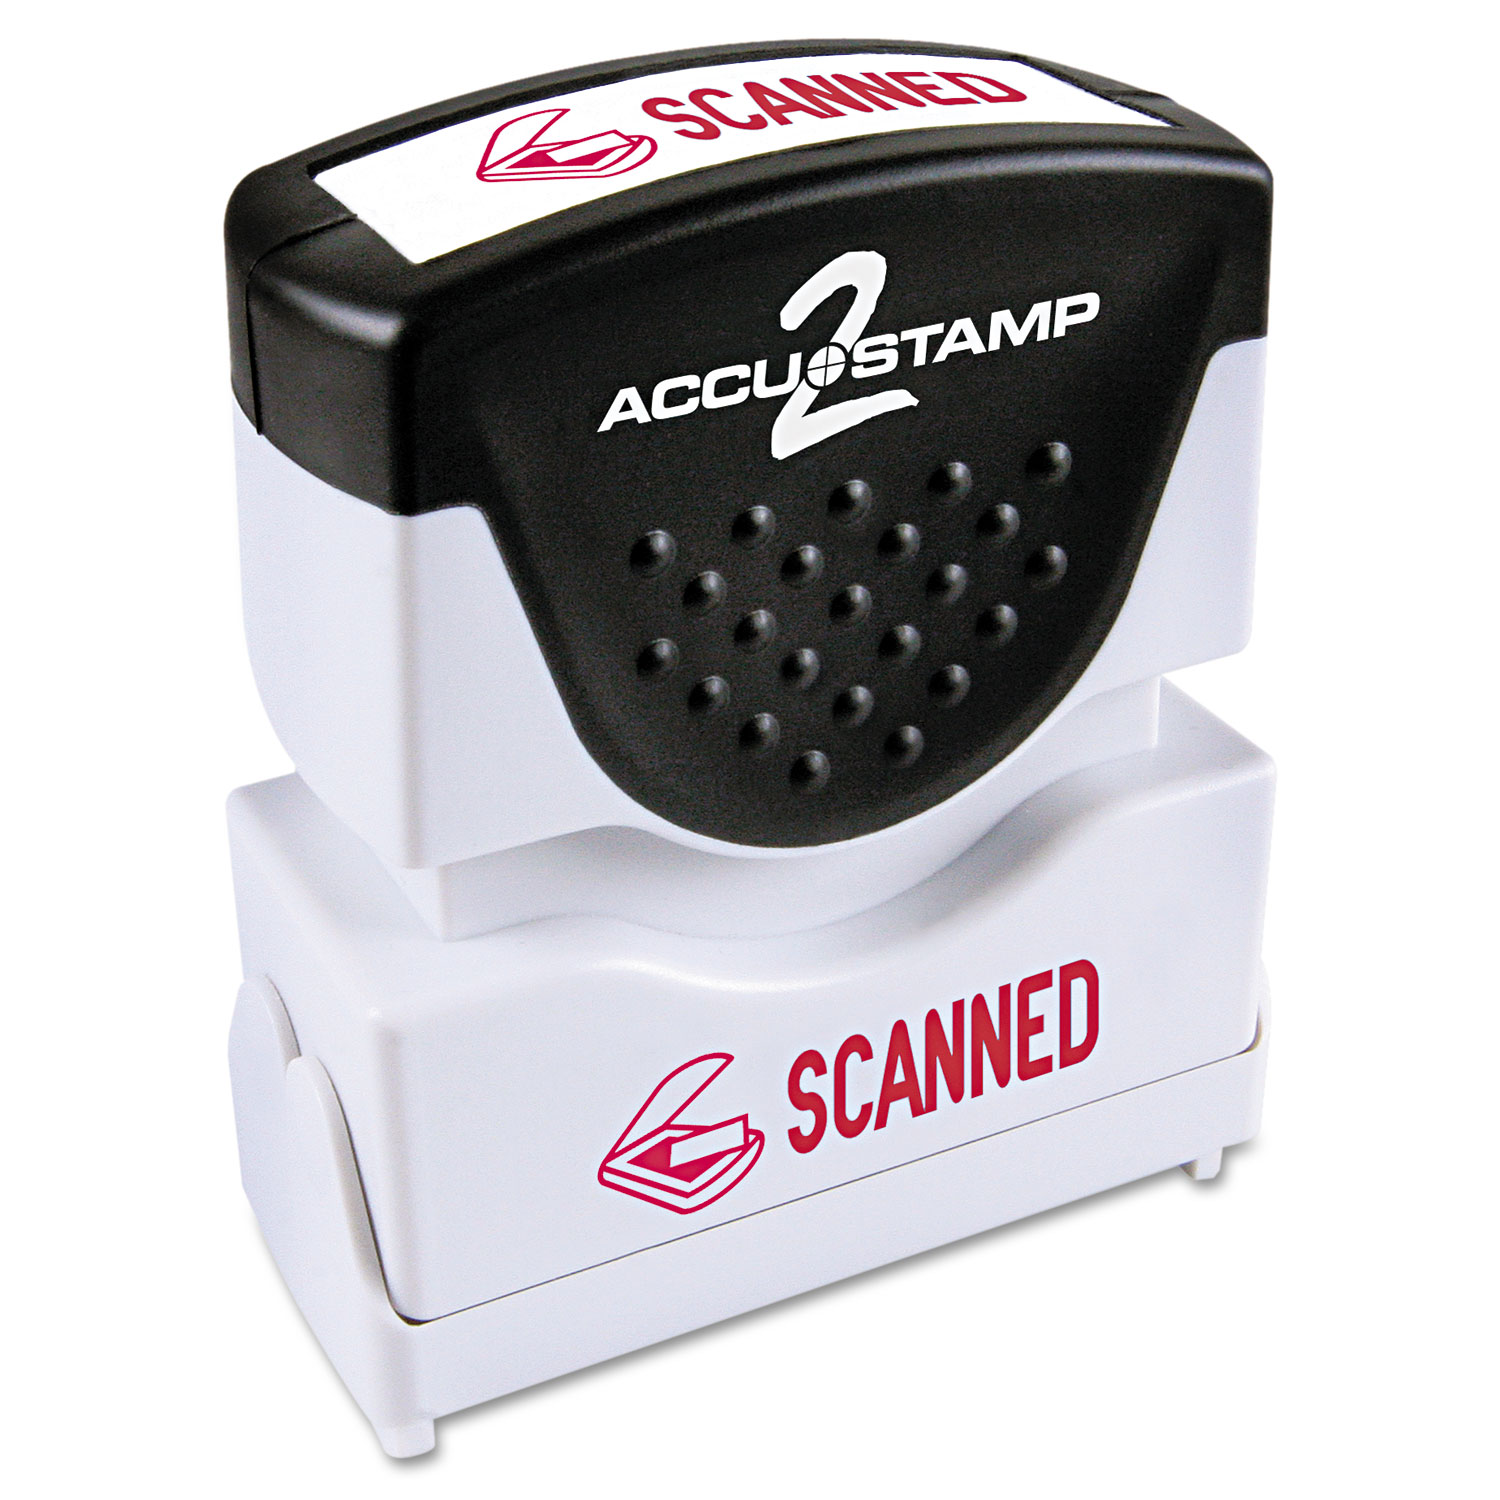  ACCUSTAMP2 035605 Pre-Inked Shutter Stamp, Red, SCANNED, 1 5/8 x 1/2 (COS035605) 